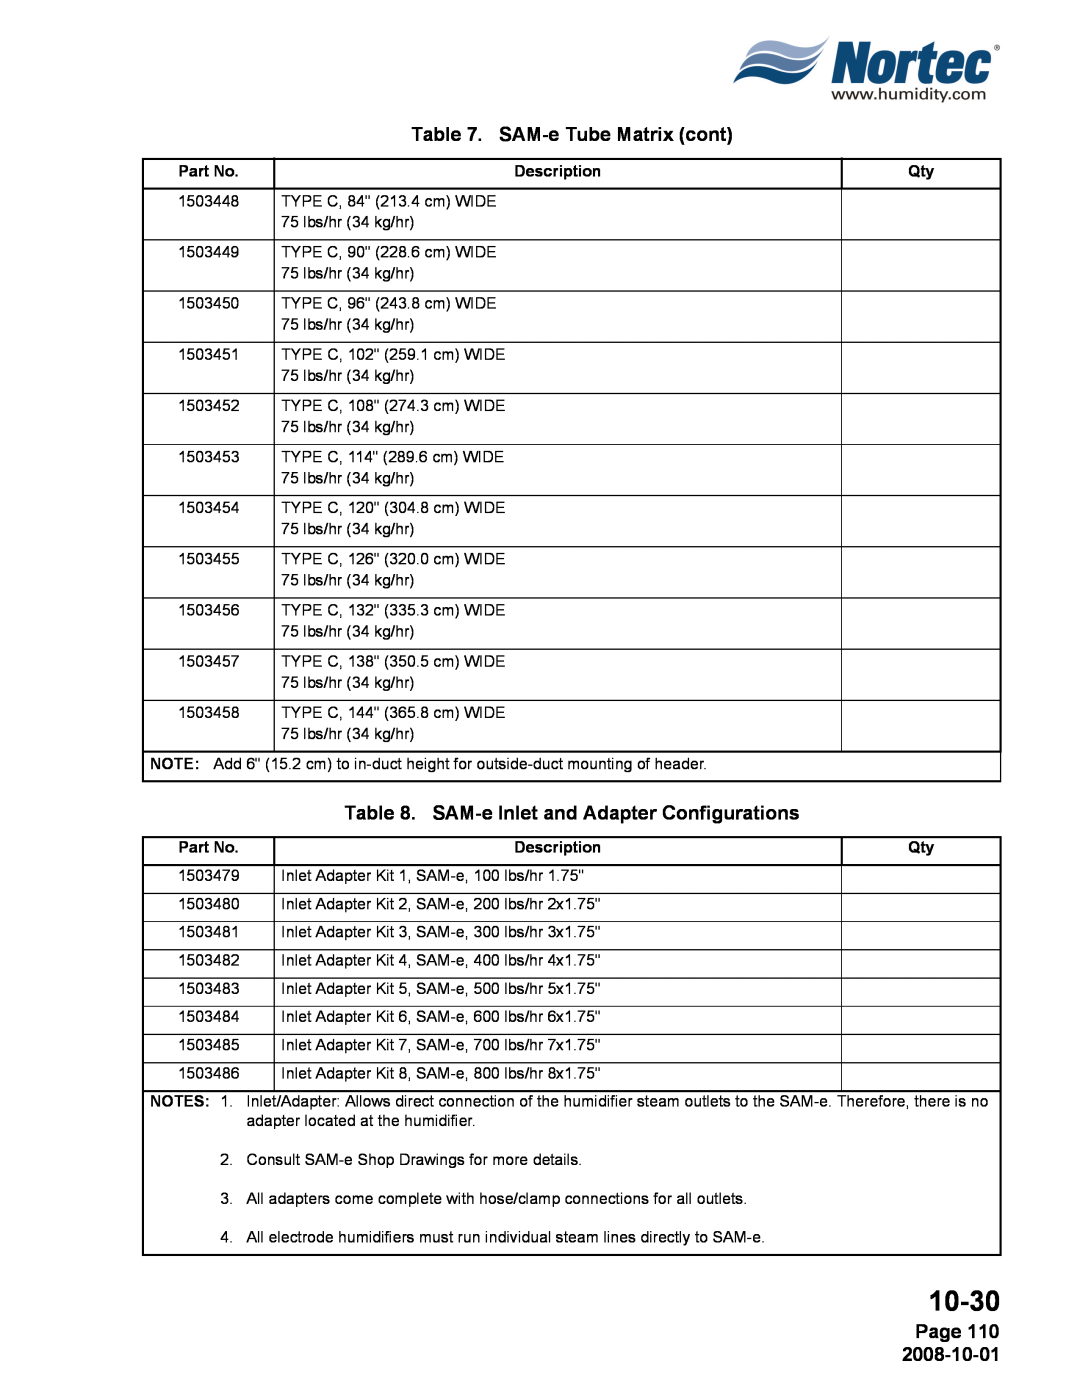 Nortec NHPC, NHTC manual 10-30, SAM-eTube Matrix cont, SAM-eInlet and Adapter Configurations, Page 110 